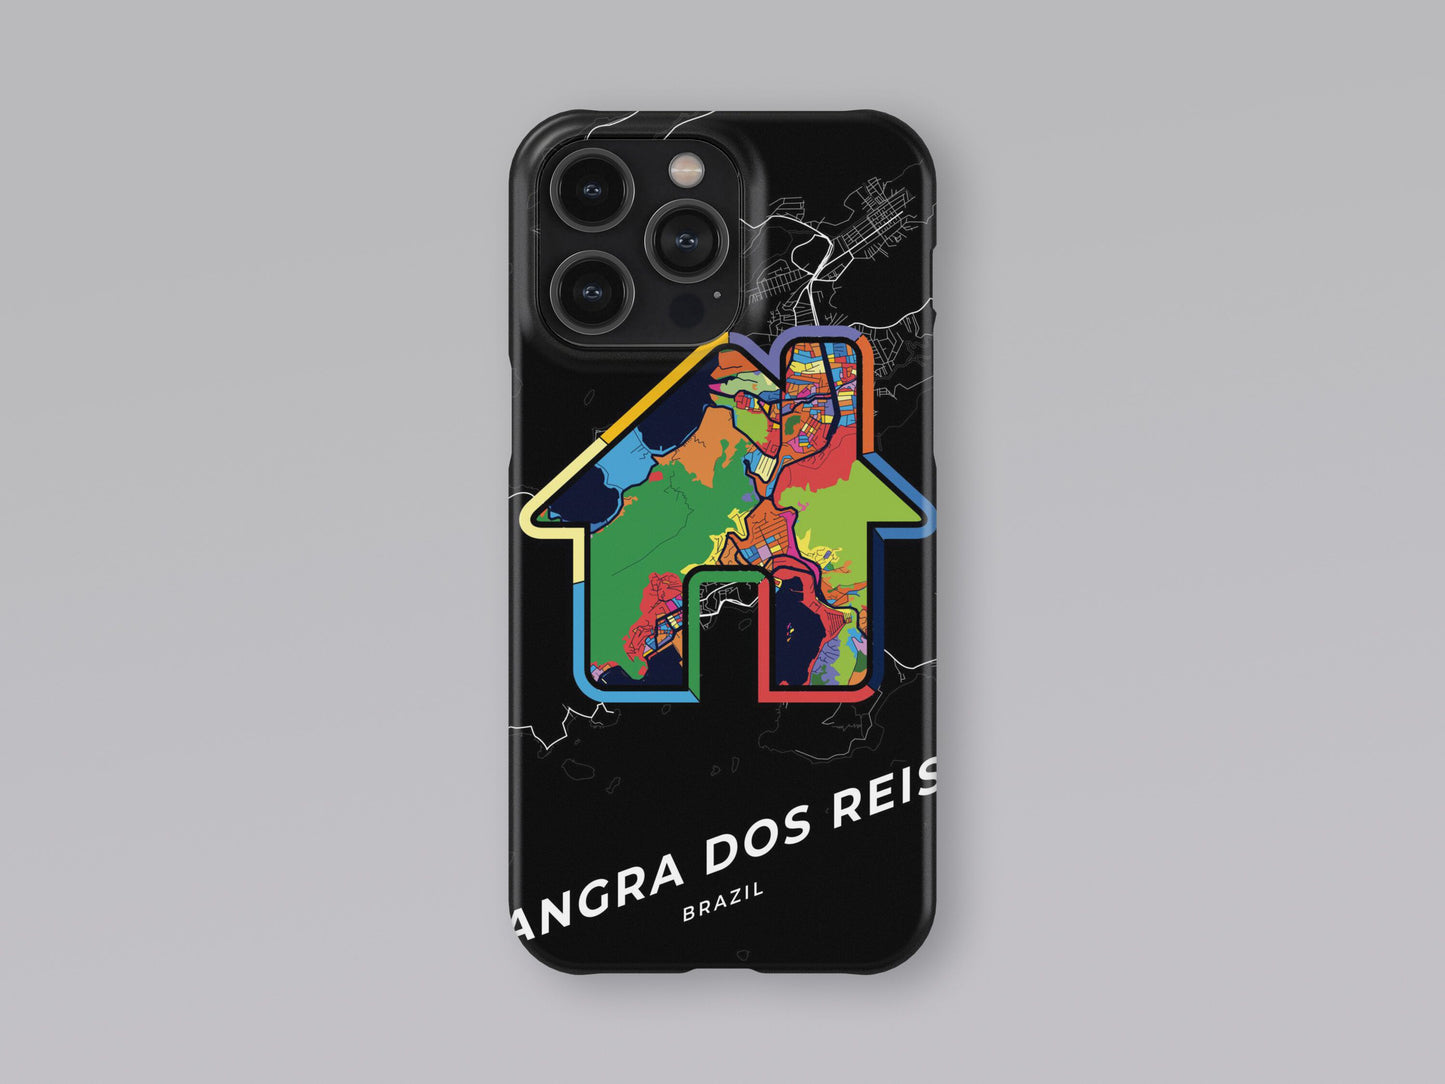 Angra Dos Reis Brazil slim phone case with colorful icon. Birthday, wedding or housewarming gift. Couple match cases. 3